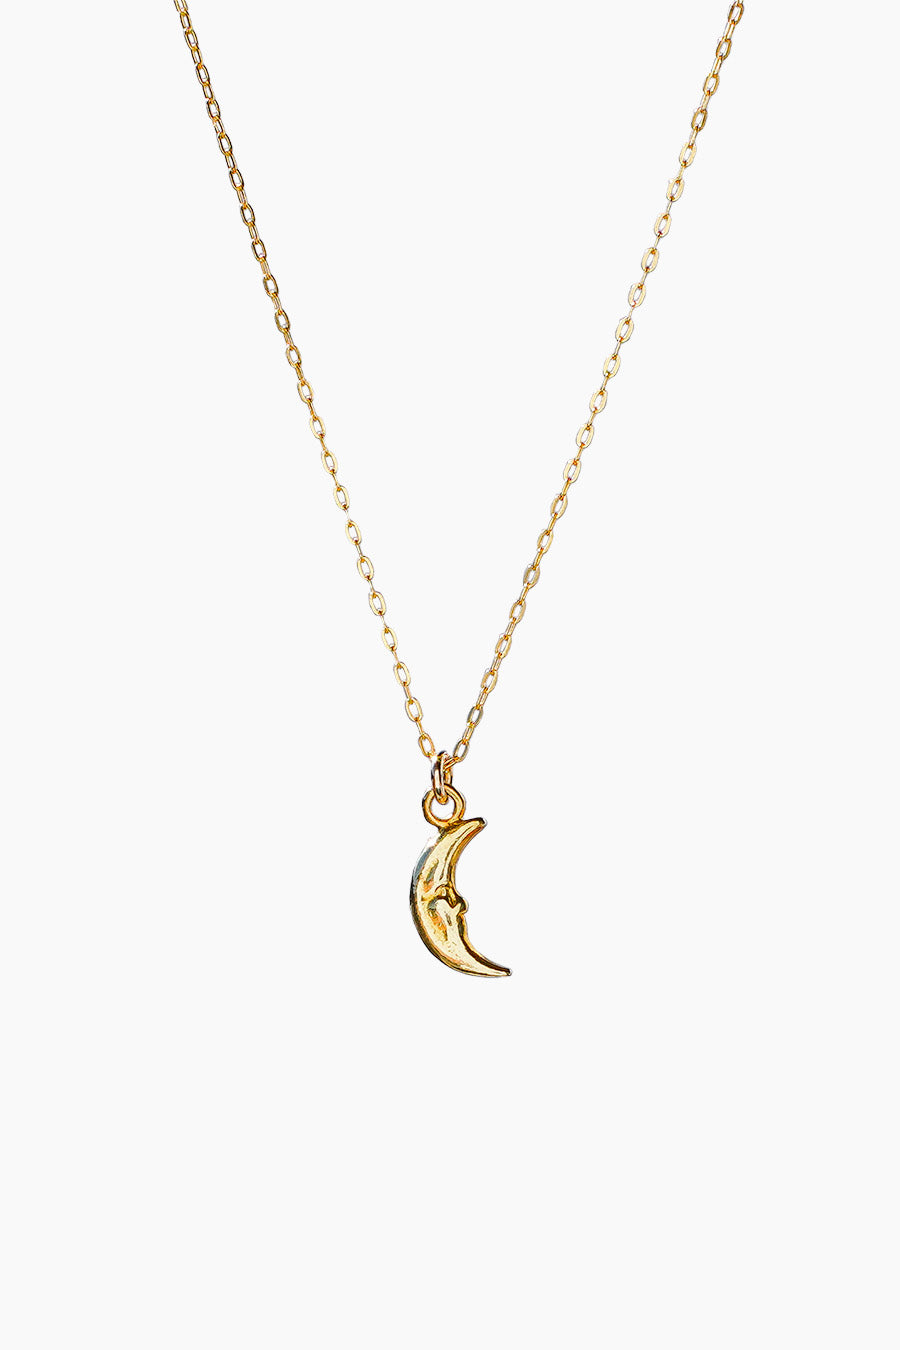 Fortuna Moon Necklace